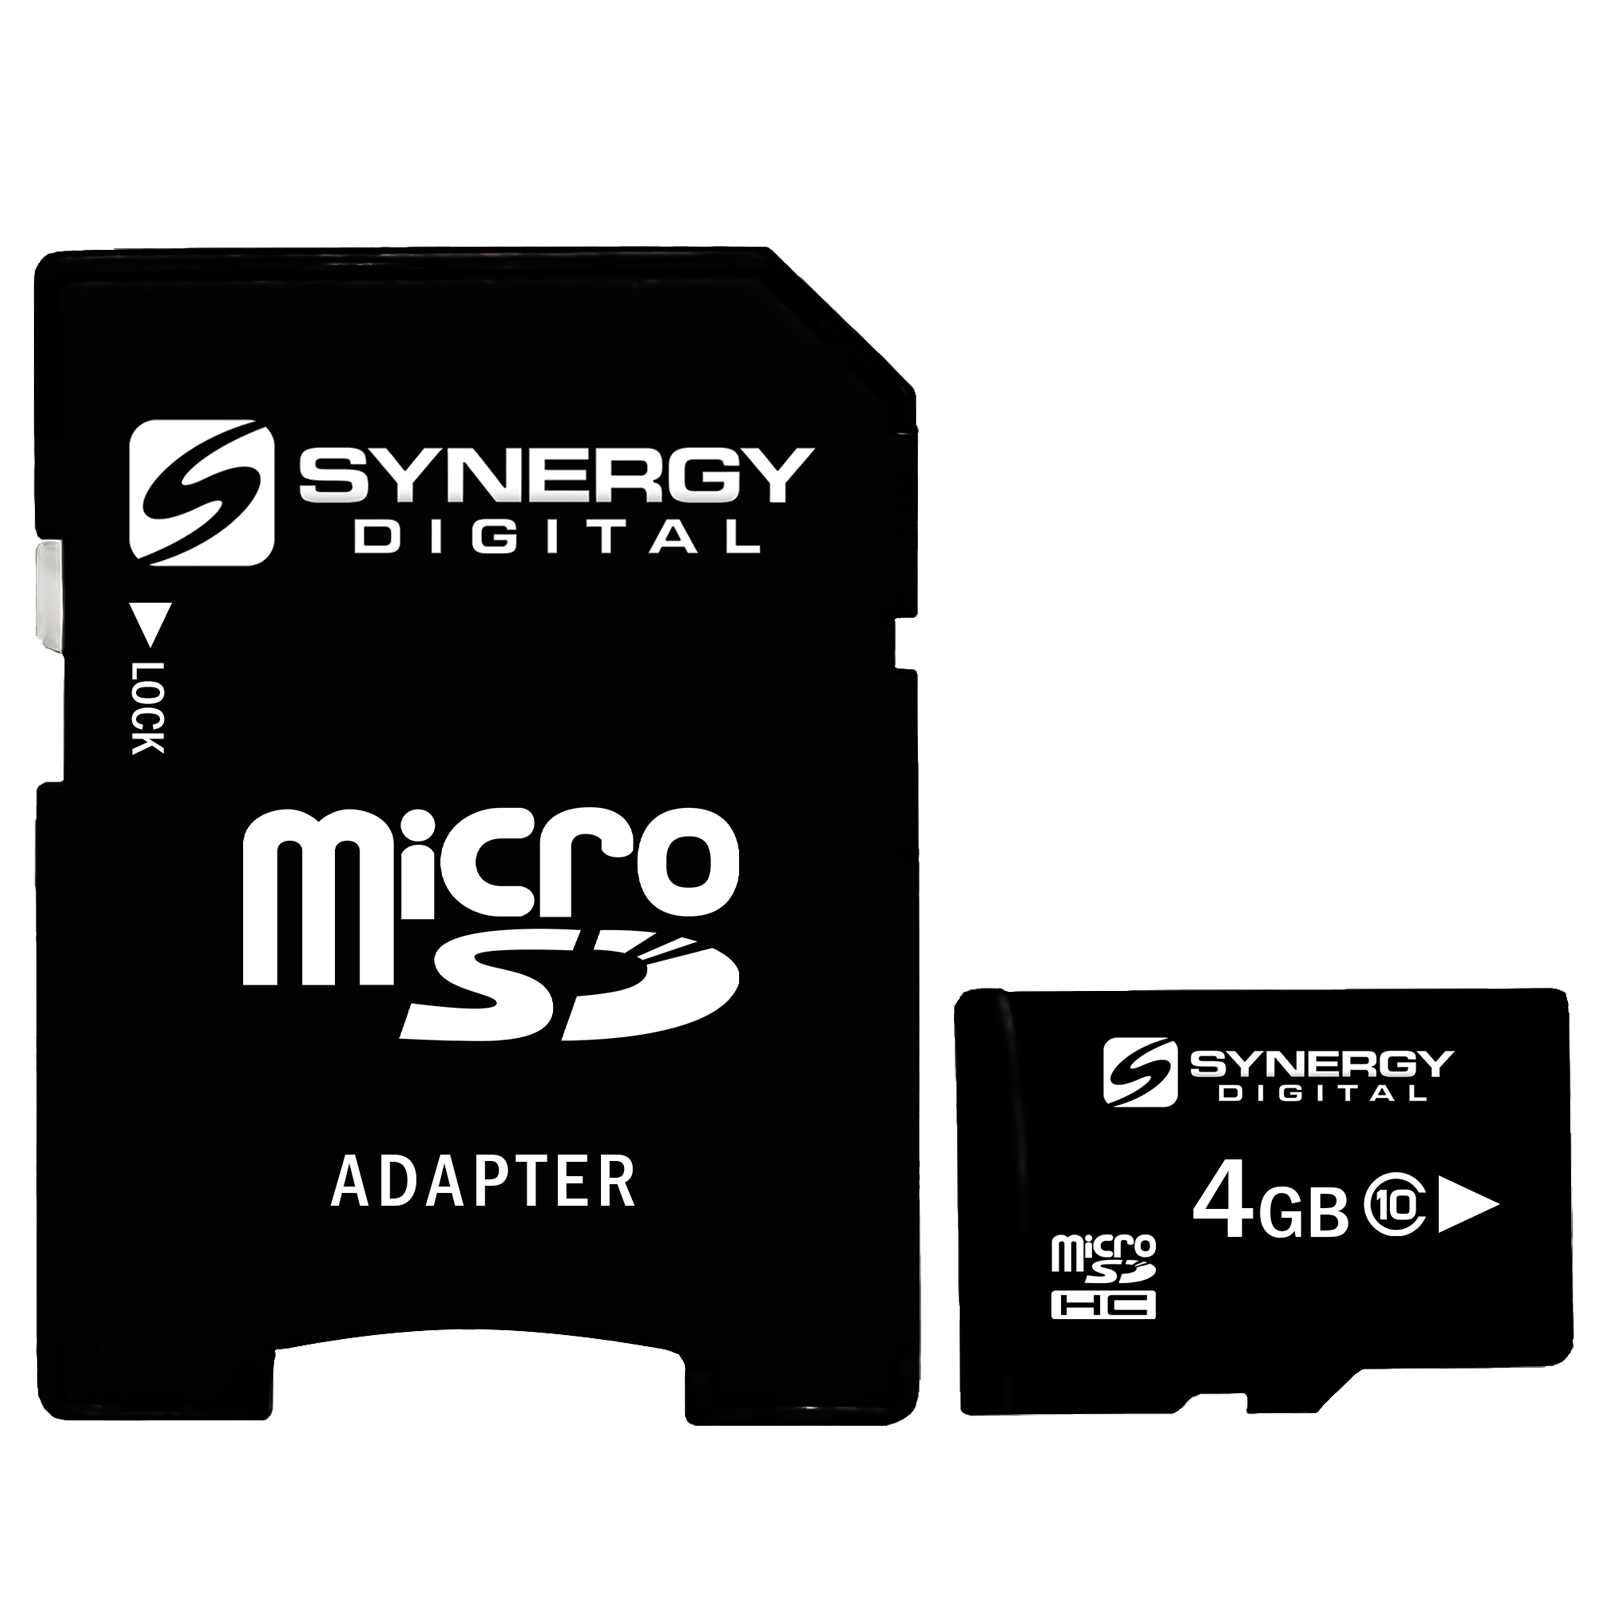 Memory Cards for SamsungCell Phone